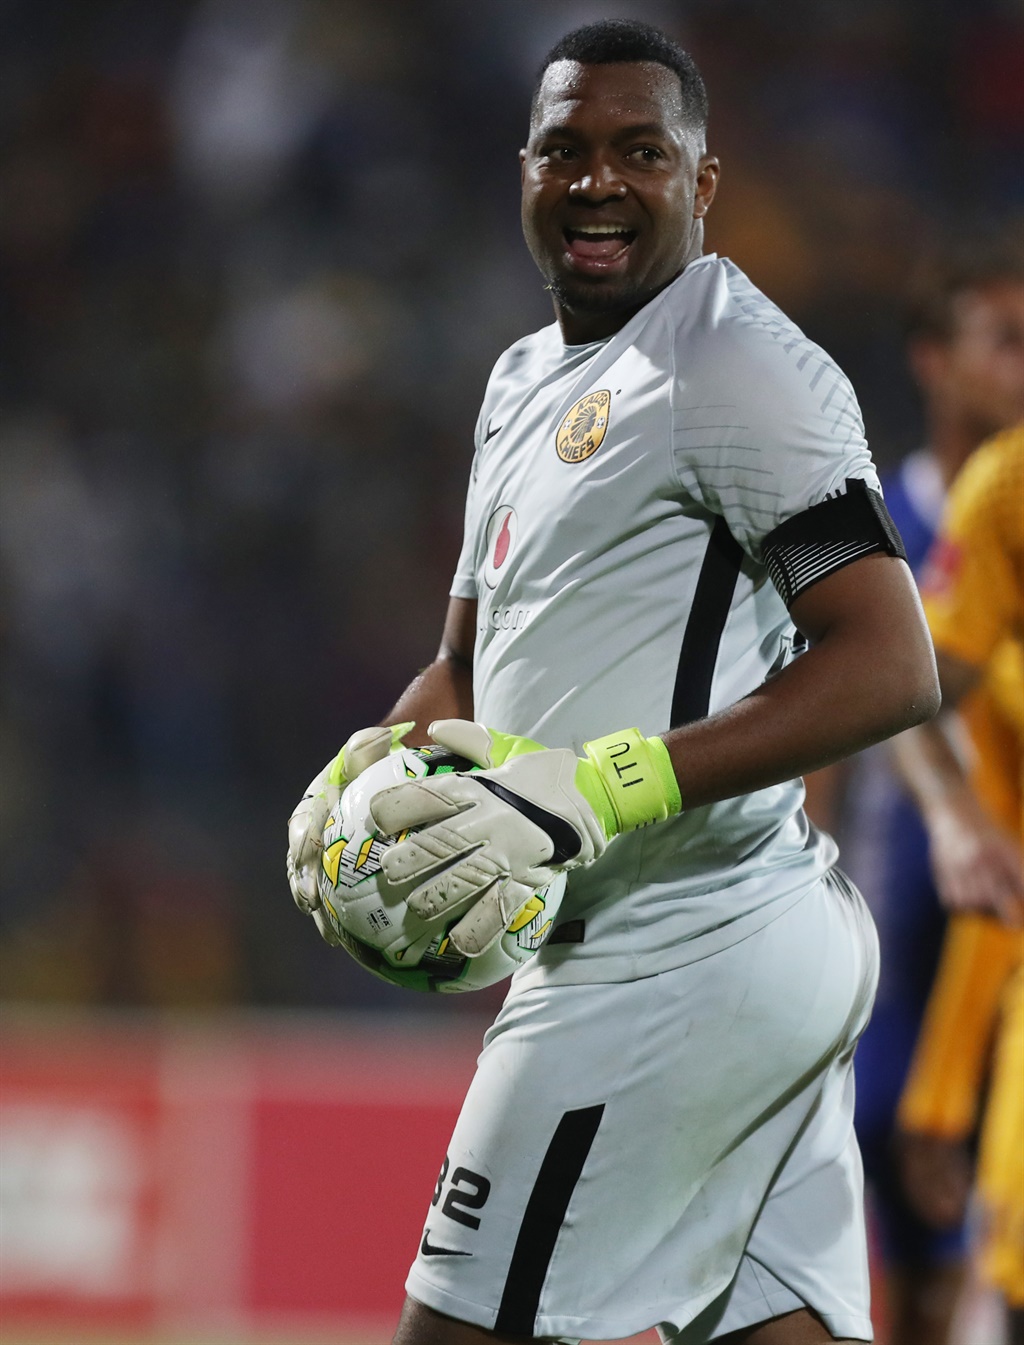 Itumeleng Khune has been cleared by the hospital after falling on his head against Golden Arrows over the weekend.